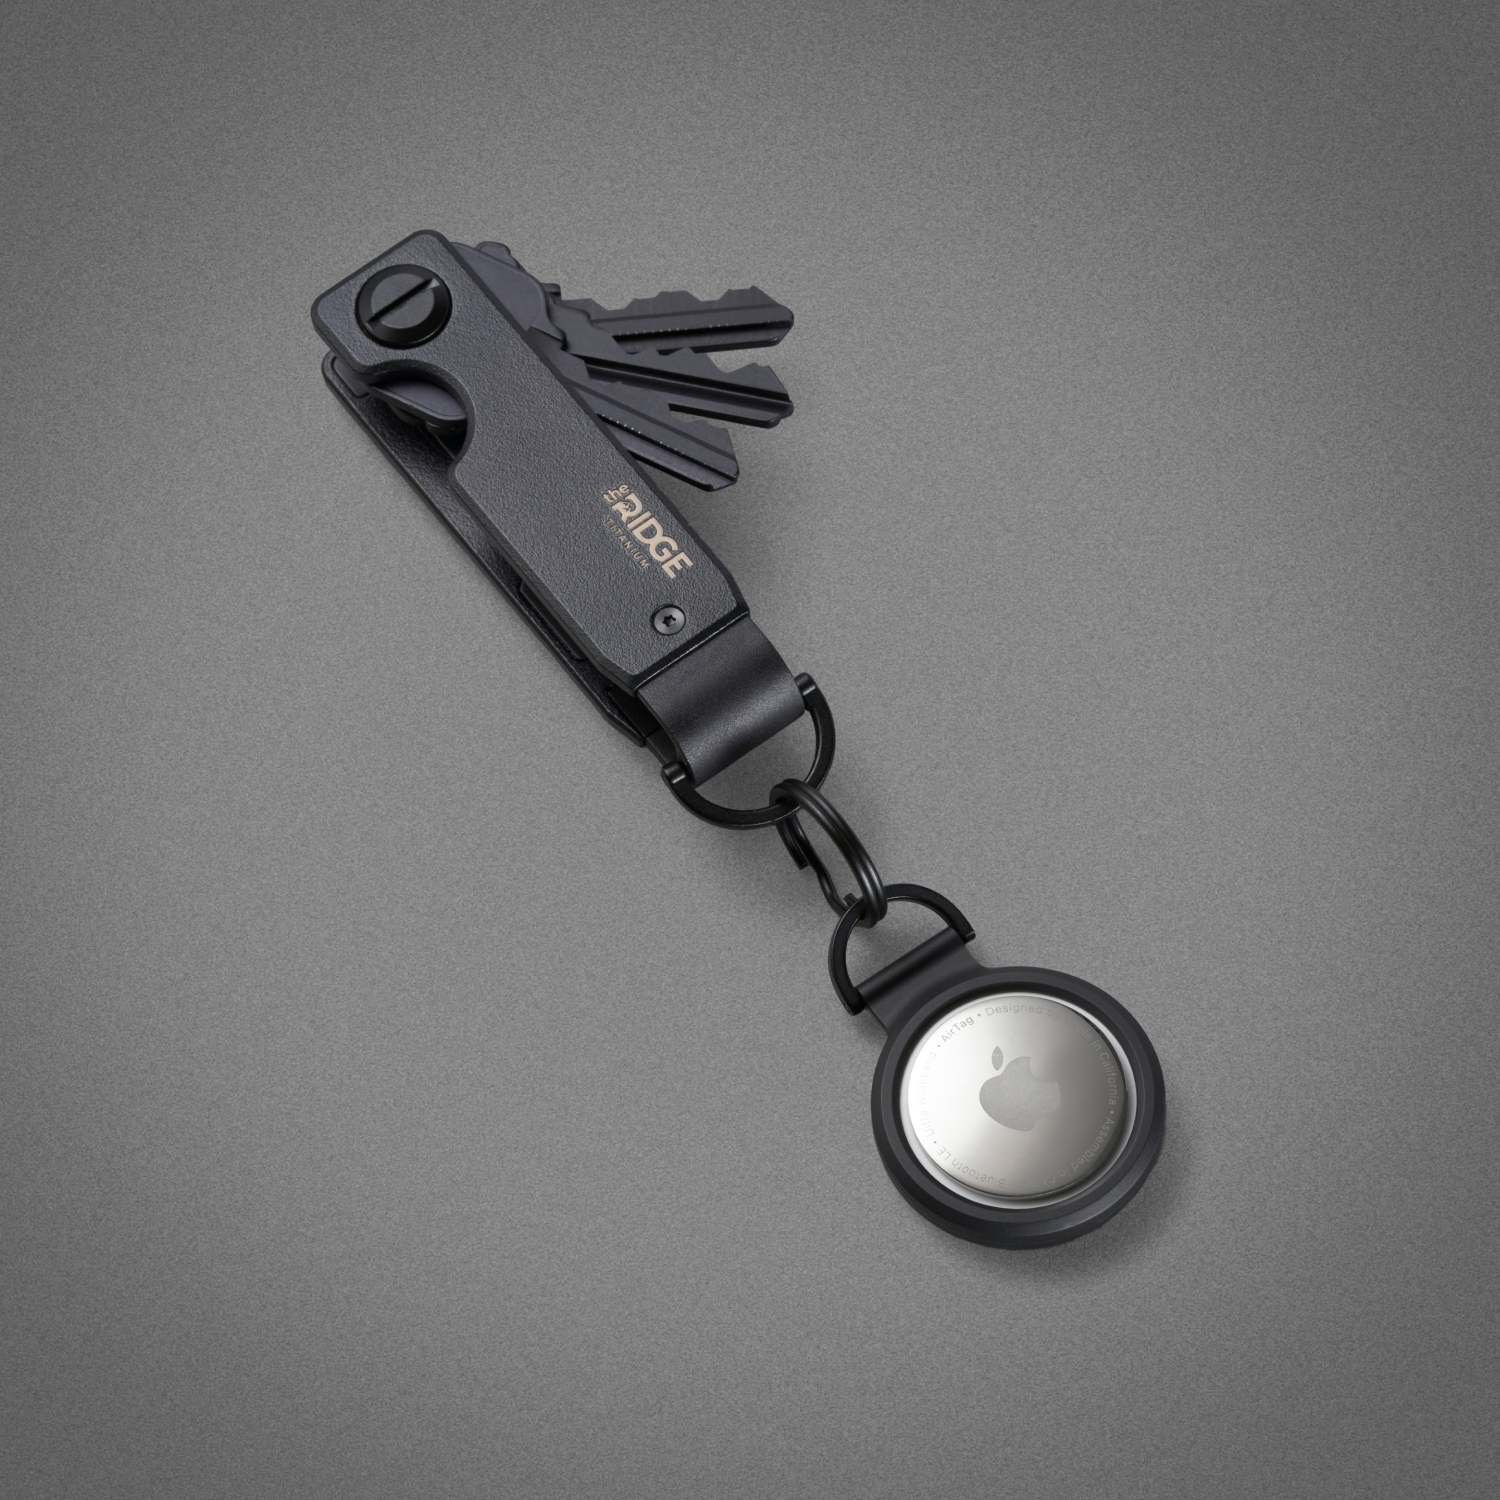 This Titanium Quick Release Keychain Will Last a Lifetime